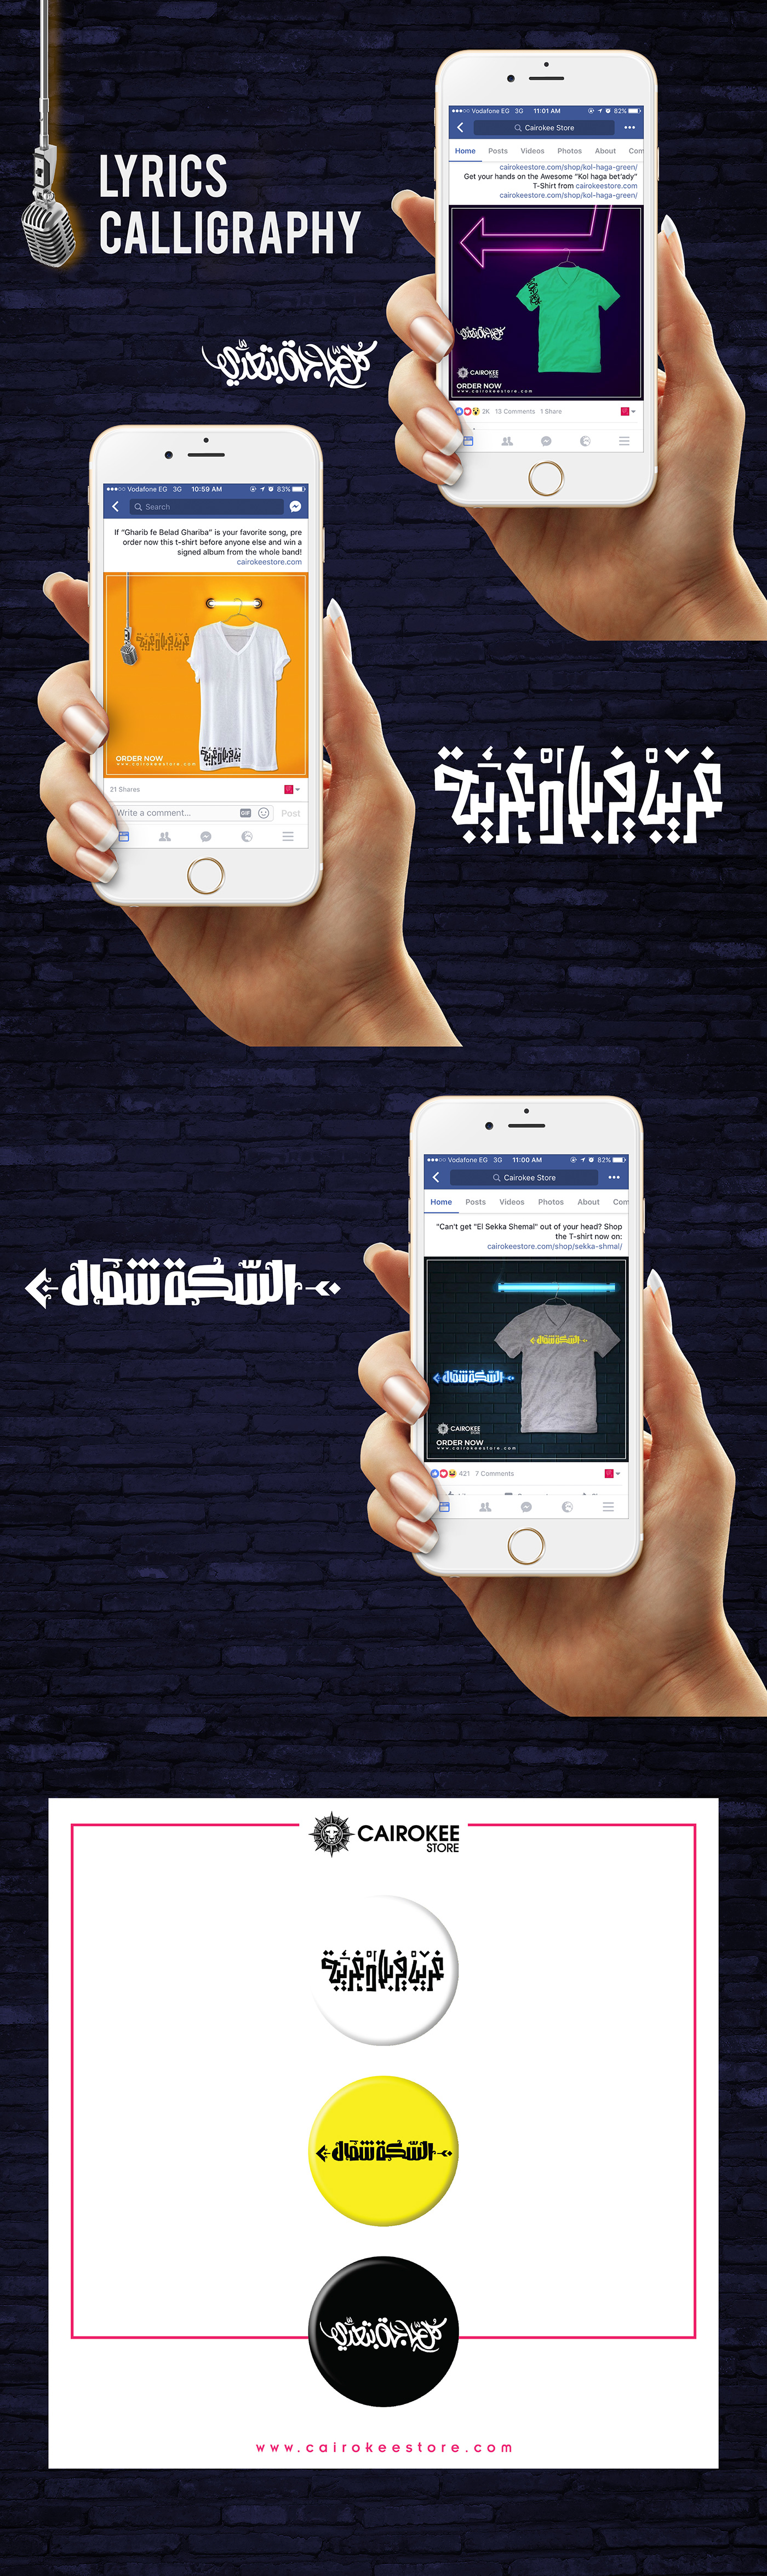 Website sliders 8bit Cairokee egypt Fashion  casual Stationery social media Facebook ads